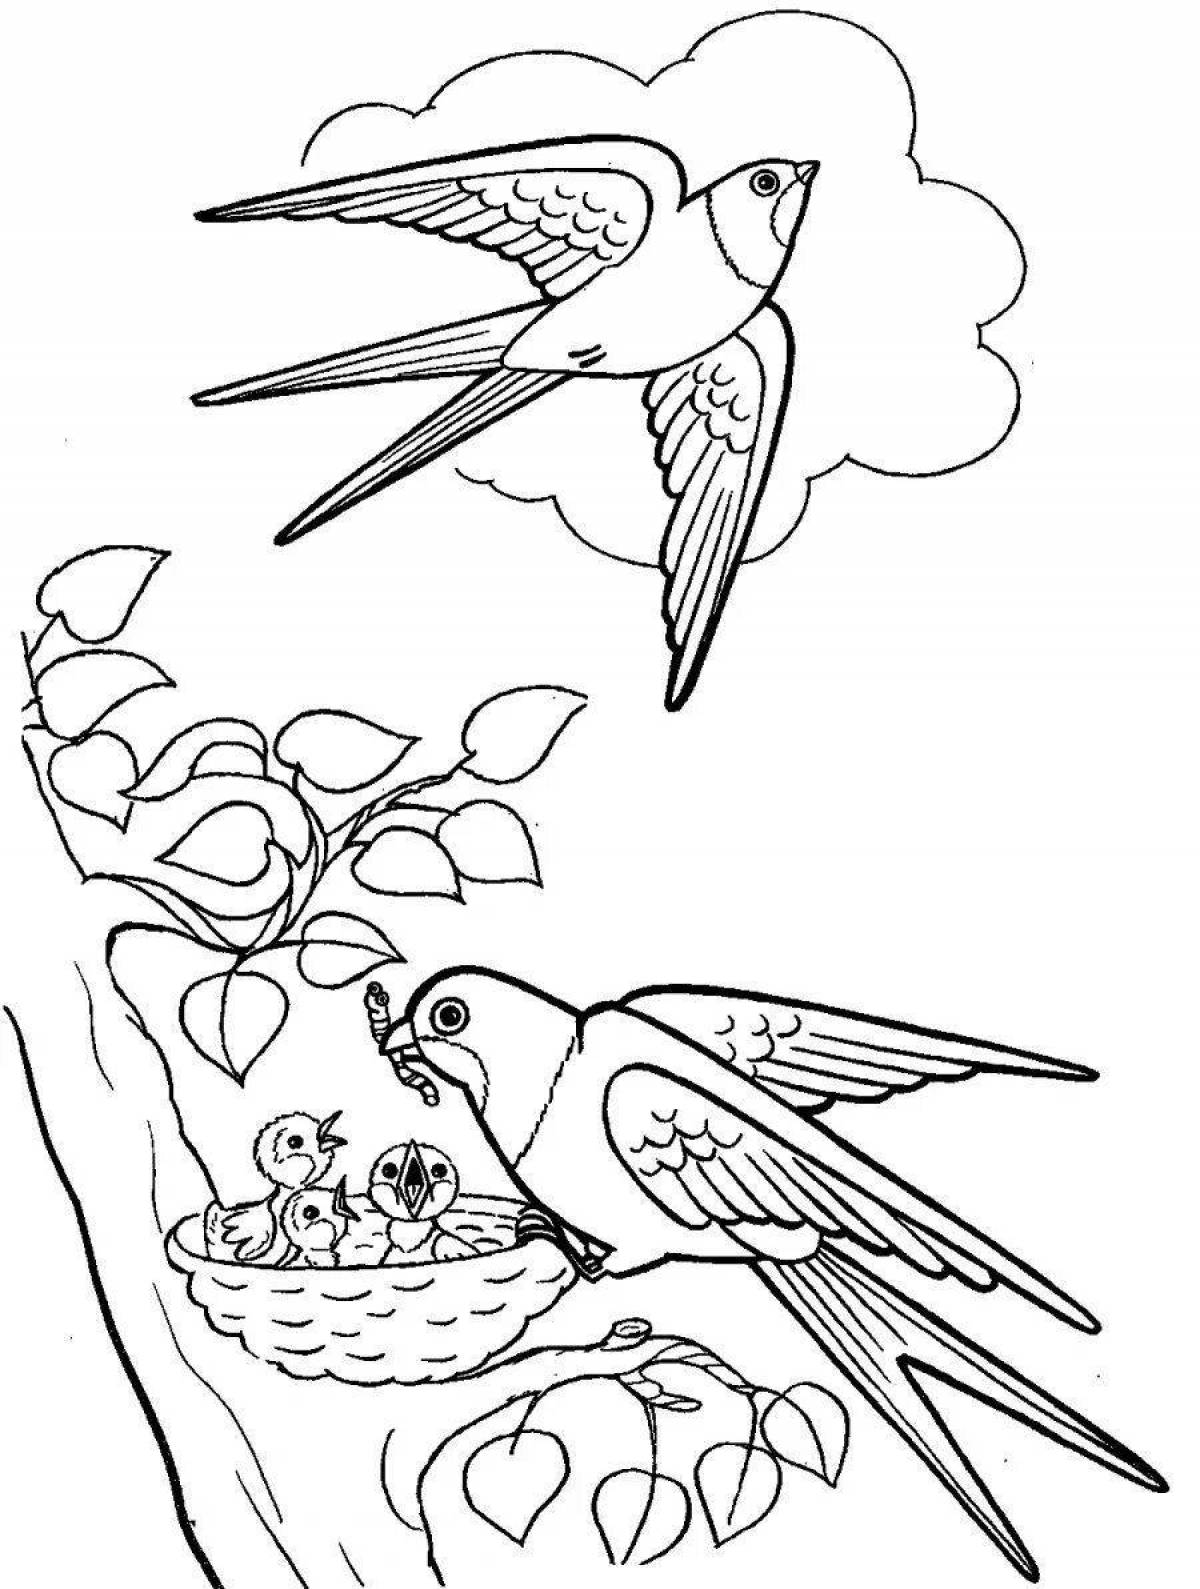 Colorful migratory birds coloring page